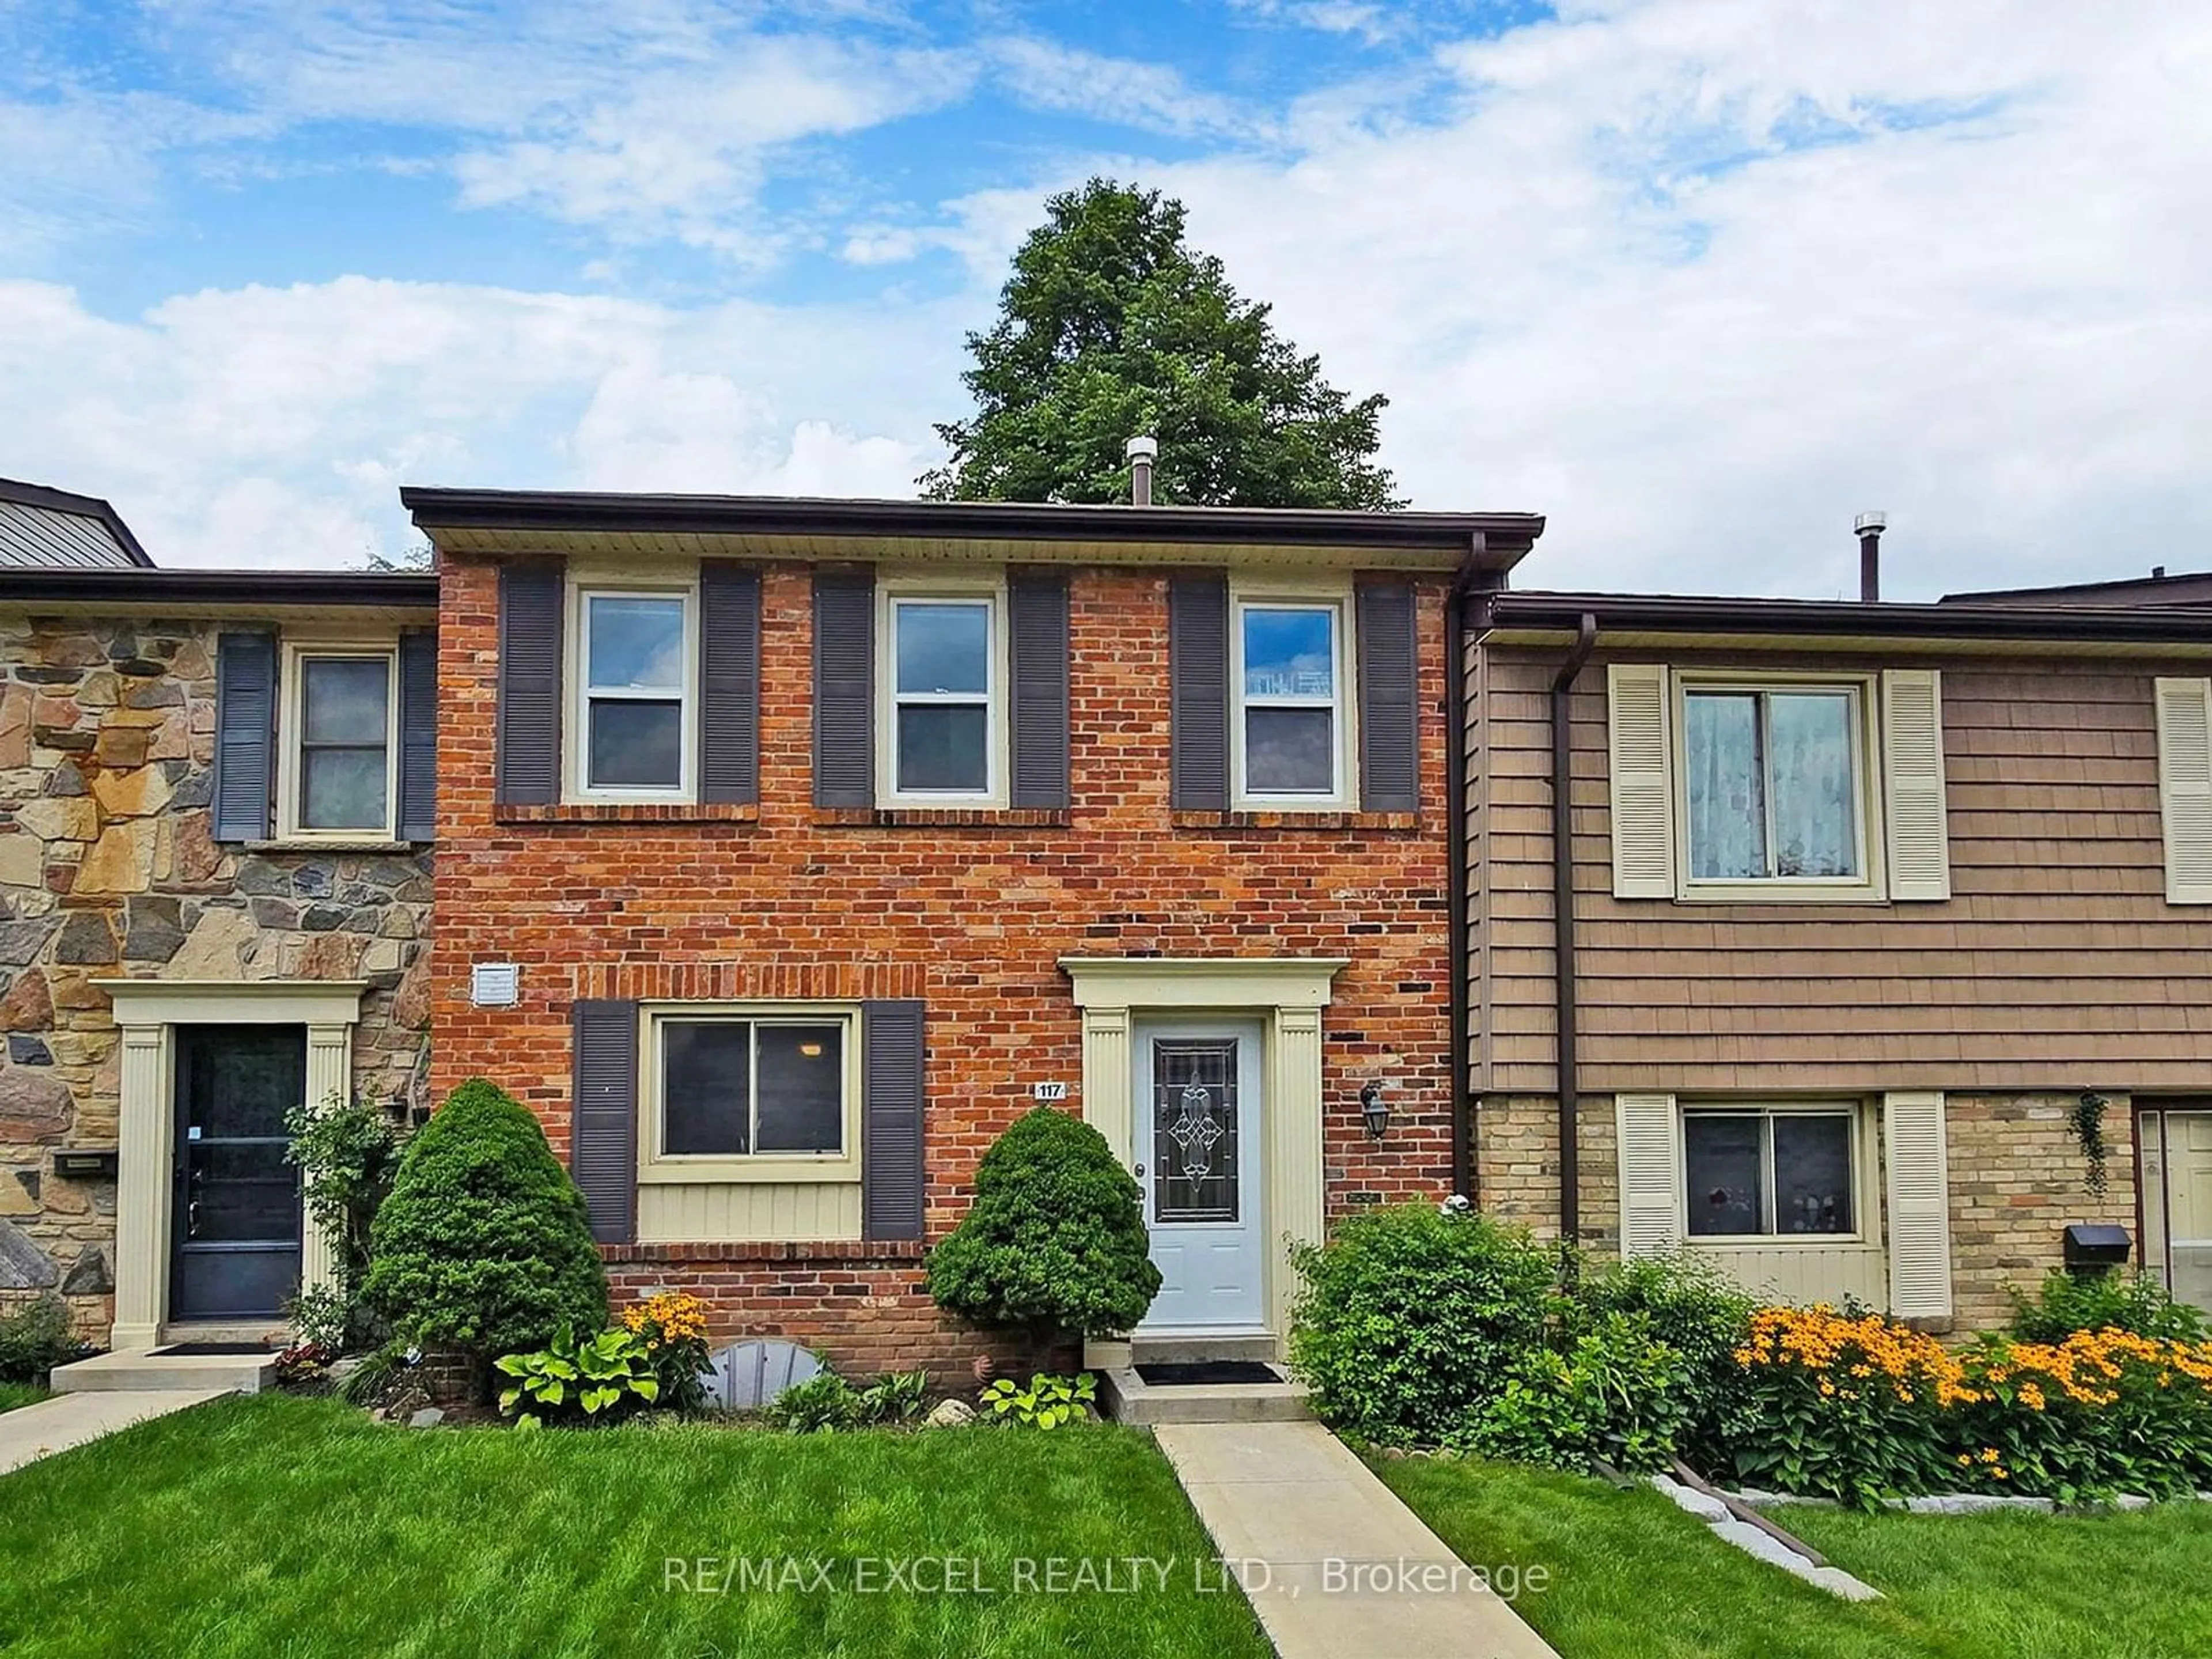 Home with brick exterior material for 117 Palmdale Dr #59, Toronto Ontario M1T 1P2